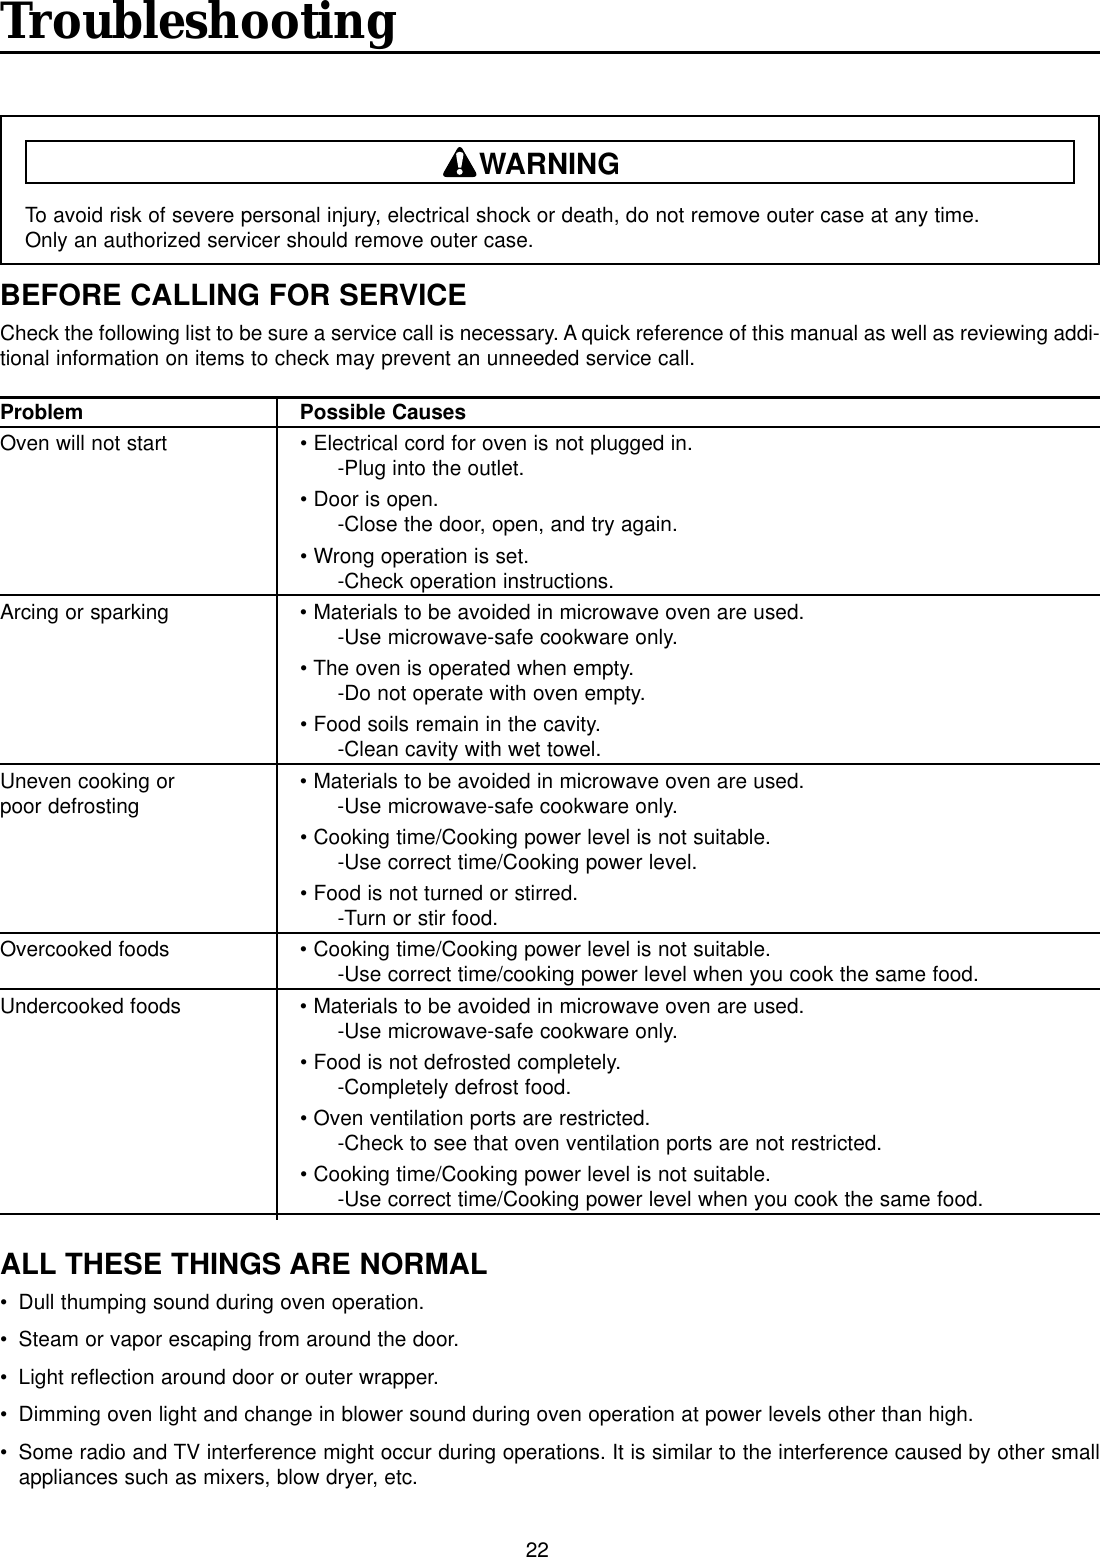 22TroubleshootingTo avoid risk of severe personal injury, electrical shock or death, do not remove outer case at any time.Only an authorized servicer should remove outer case.WARNINGBEFORE CALLING FOR SERVICECheck the following list to be sure a service call is necessary. A quick reference of this manual as well as reviewing addi-tional information on items to check may prevent an unneeded service call.ALL THESE THINGS ARE NORMAL• Dull thumping sound during oven operation.• Steam or vapor escaping from around the door.• Light reflection around door or outer wrapper.• Dimming oven light and change in blower sound during oven operation at power levels other than high.• Some radio and TV interference might occur during operations. It is similar to the interference caused by other smallappliances such as mixers, blow dryer, etc.Problem Possible CausesOven will not start • Electrical cord for oven is not plugged in.-Plug into the outlet.• Door is open.-Close the door, open, and try again.• Wrong operation is set.-Check operation instructions.Arcing or sparking • Materials to be avoided in microwave oven are used.-Use microwave-safe cookware only.• The oven is operated when empty.-Do not operate with oven empty.• Food soils remain in the cavity.-Clean cavity with wet towel.Uneven cooking or  • Materials to be avoided in microwave oven are used.poor defrosting -Use microwave-safe cookware only.• Cooking time/Cooking power level is not suitable.-Use correct time/Cooking power level.• Food is not turned or stirred.-Turn or stir food.Overcooked foods • Cooking time/Cooking power level is not suitable.-Use correct time/cooking power level when you cook the same food.Undercooked foods • Materials to be avoided in microwave oven are used.-Use microwave-safe cookware only.• Food is not defrosted completely.-Completely defrost food.• Oven ventilation ports are restricted.-Check to see that oven ventilation ports are not restricted.• Cooking time/Cooking power level is not suitable.-Use correct time/Cooking power level when you cook the same food.